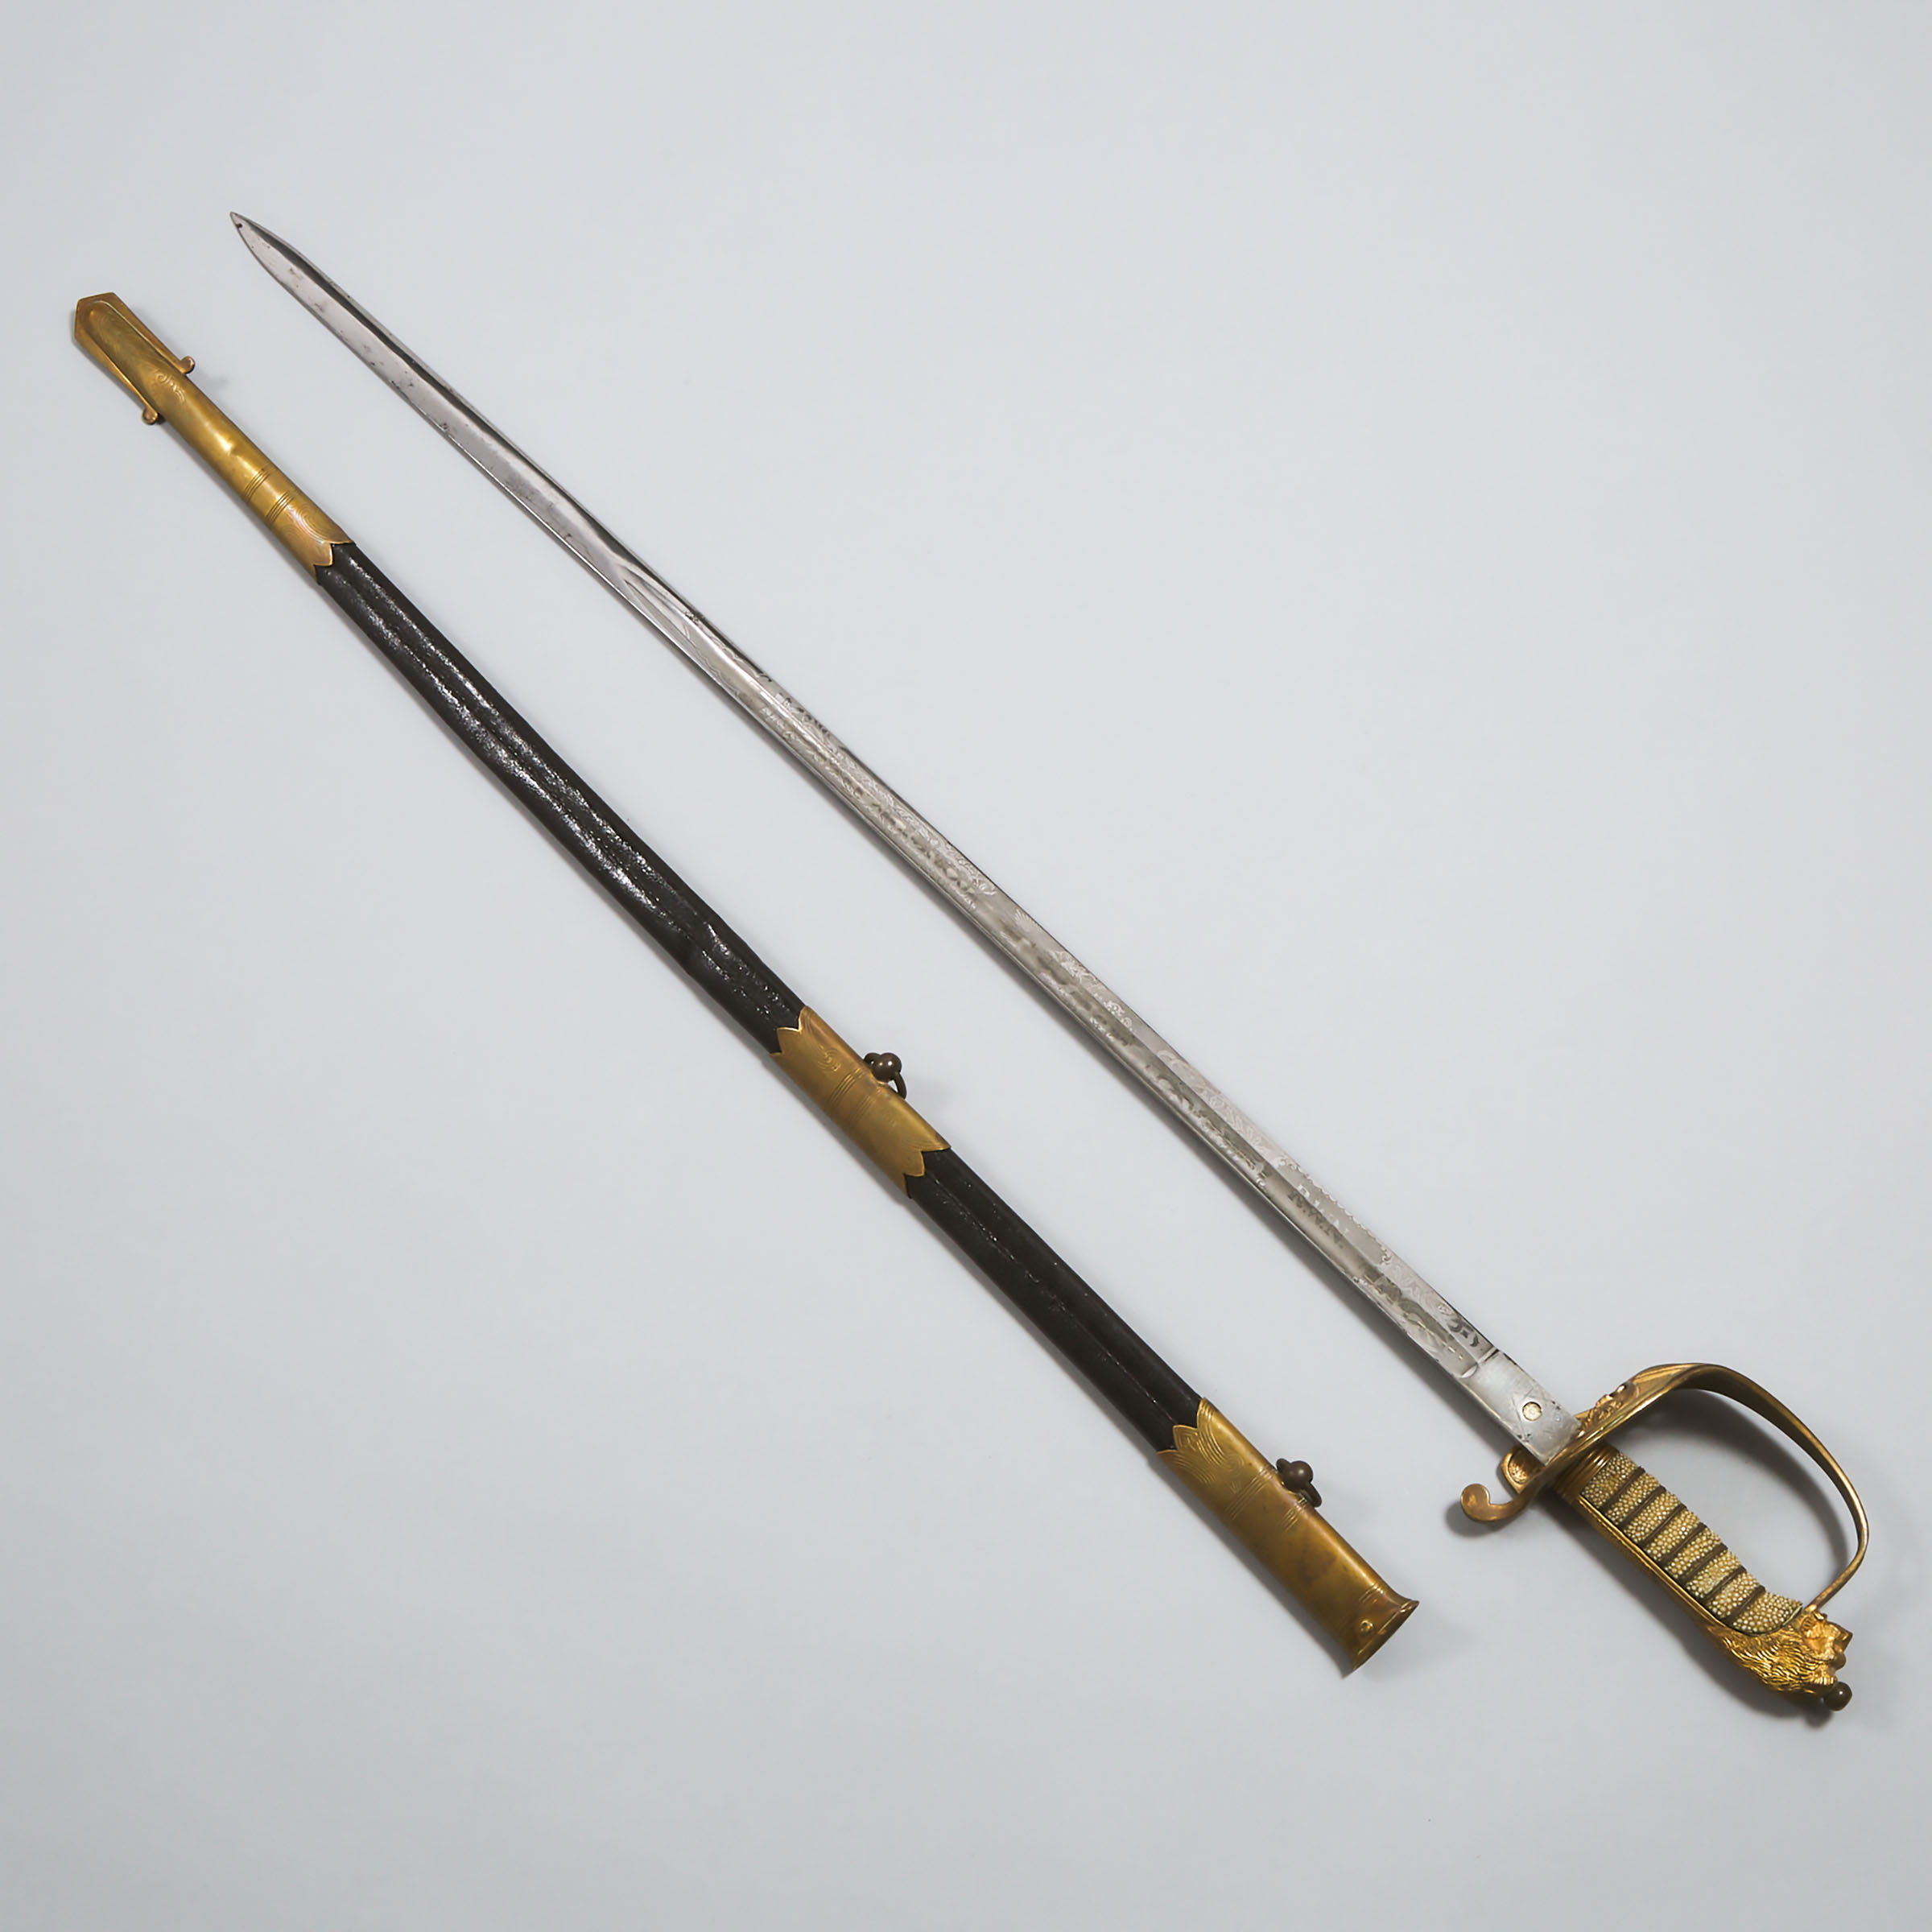 George V WWI Royal Navy Reserve Officer's Sword, J.R. Gaunt & Son, London, early 20th century